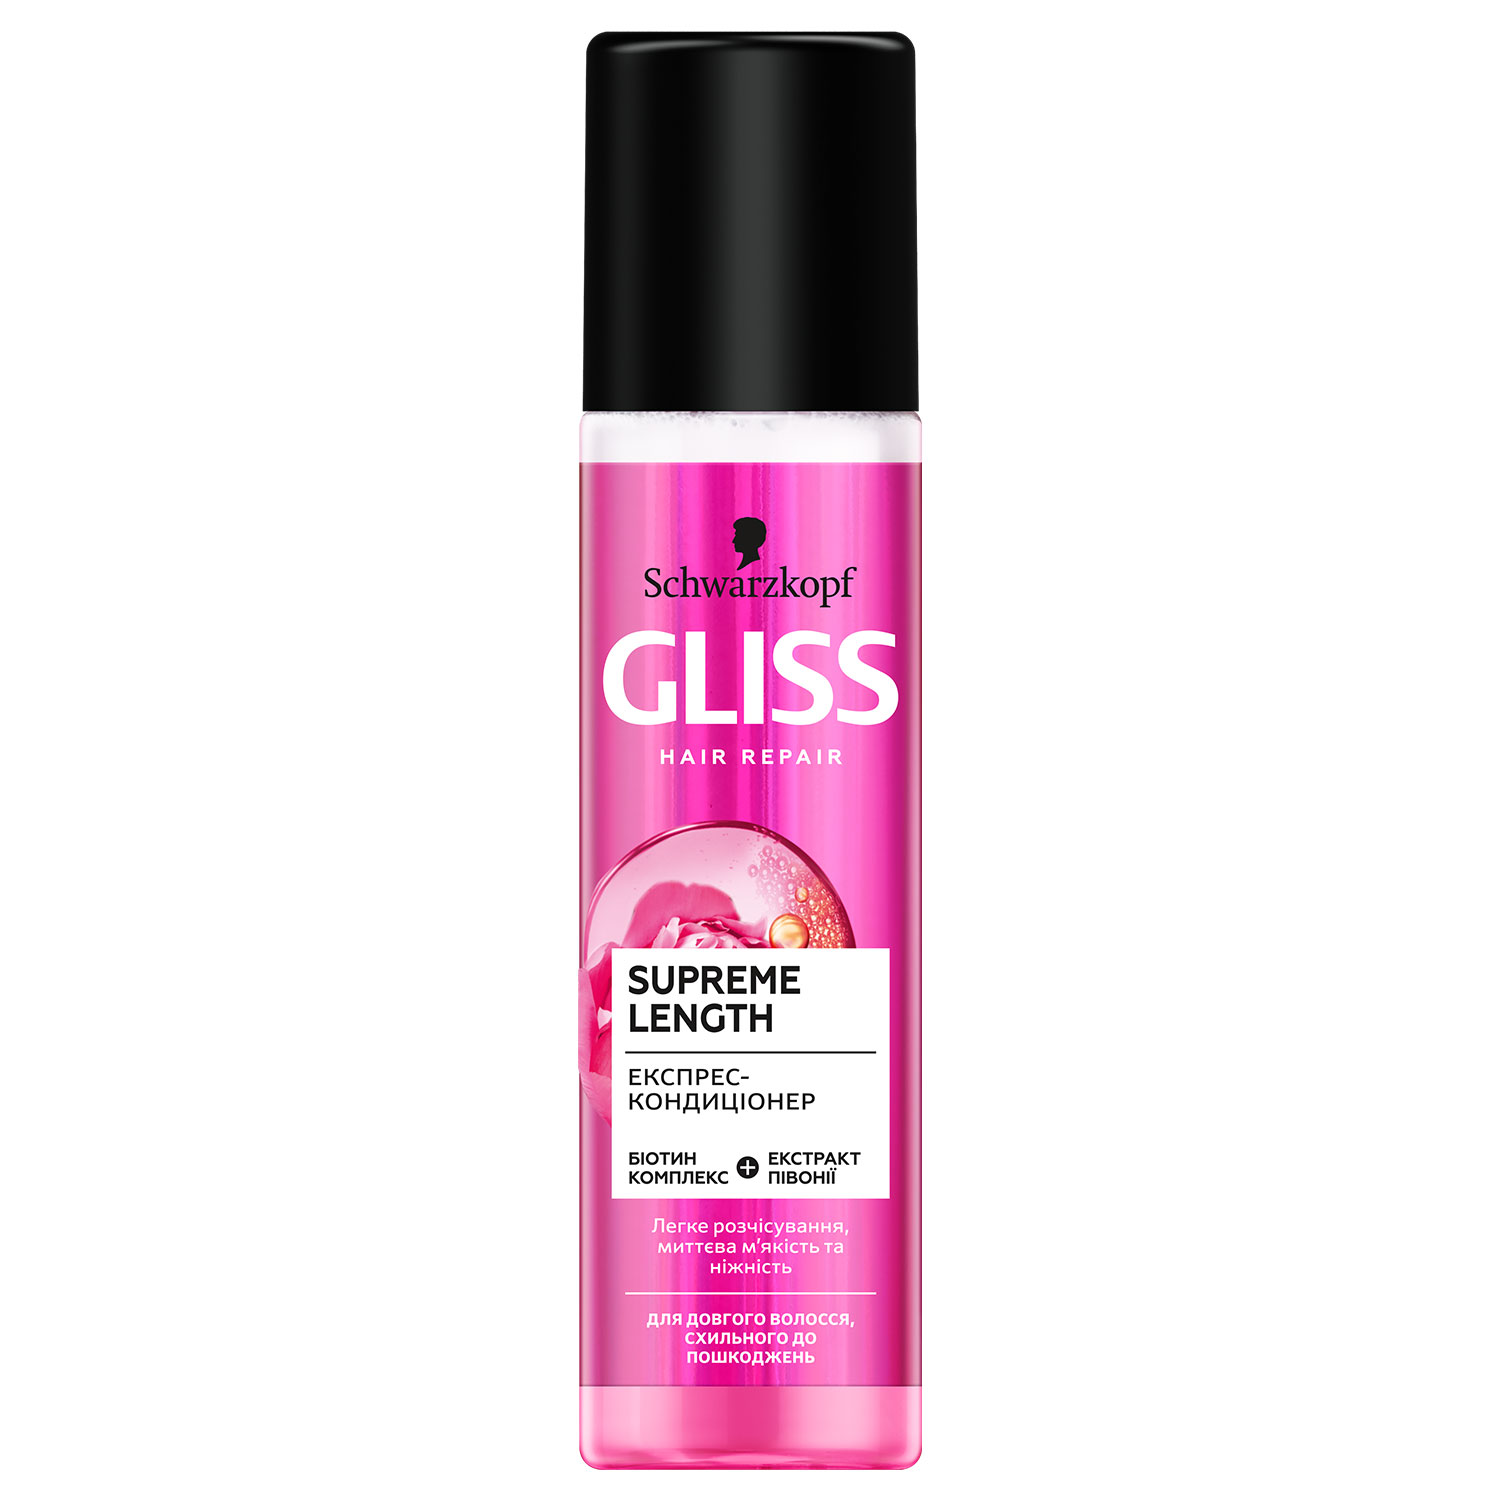 GLISS Express Repair Conditioner Supreme Length 200 ml